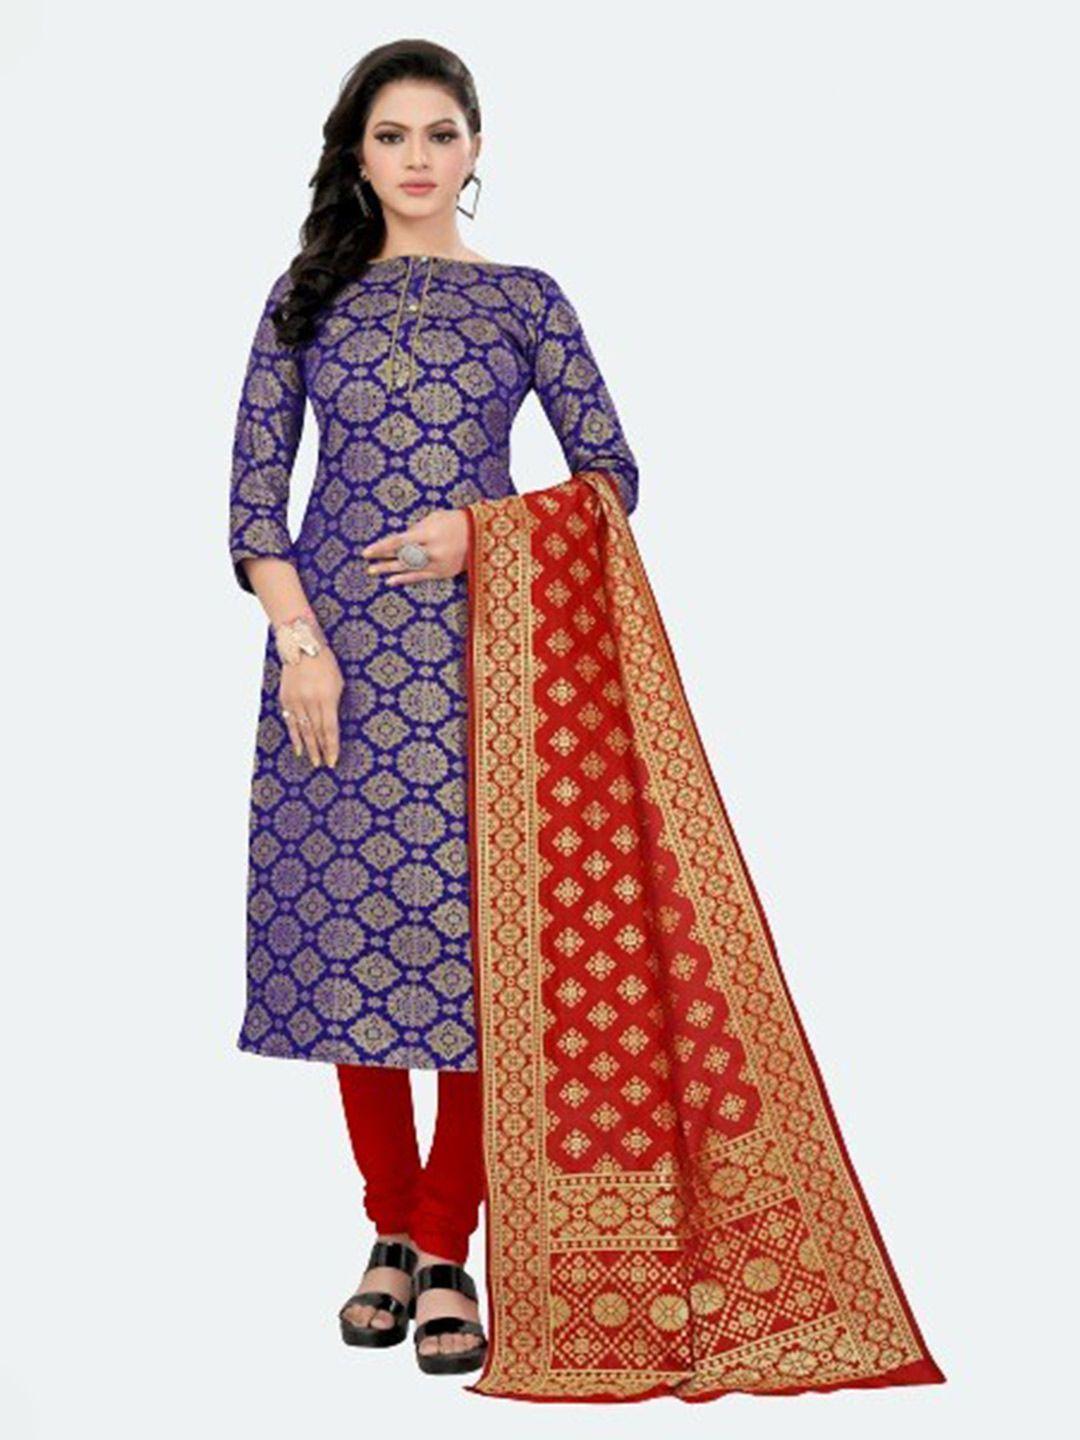 morly turquoise blue & red dupion silk unstitched dress material